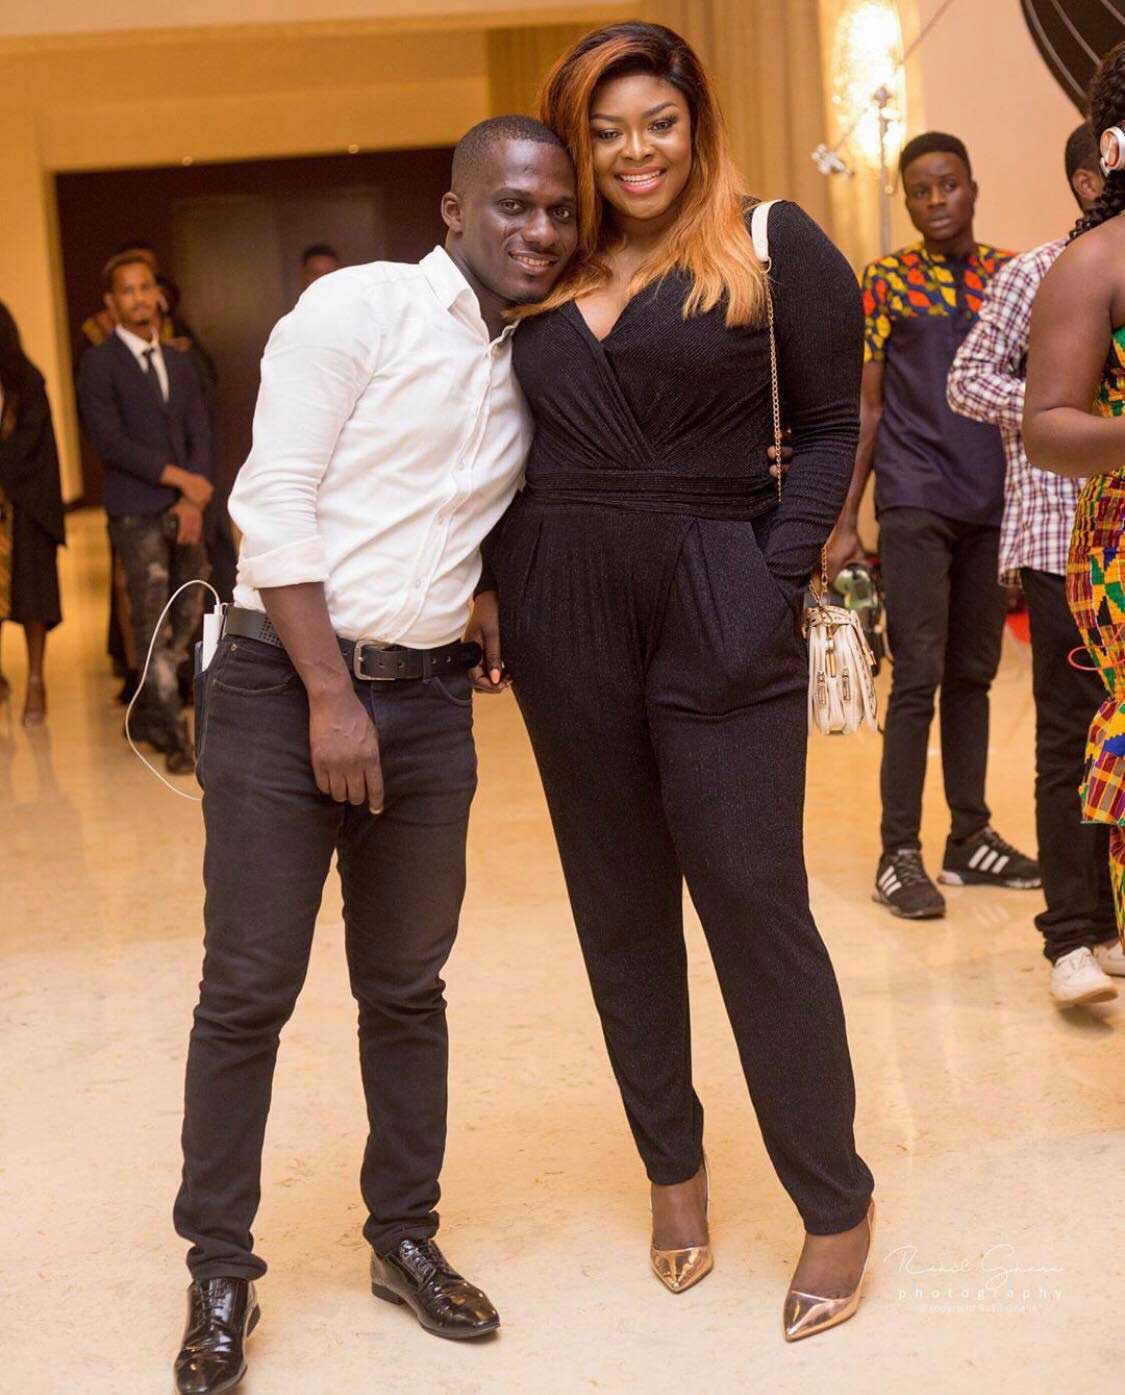 Zion Felix puts his beautiful girlfriend on display as he gushes over her